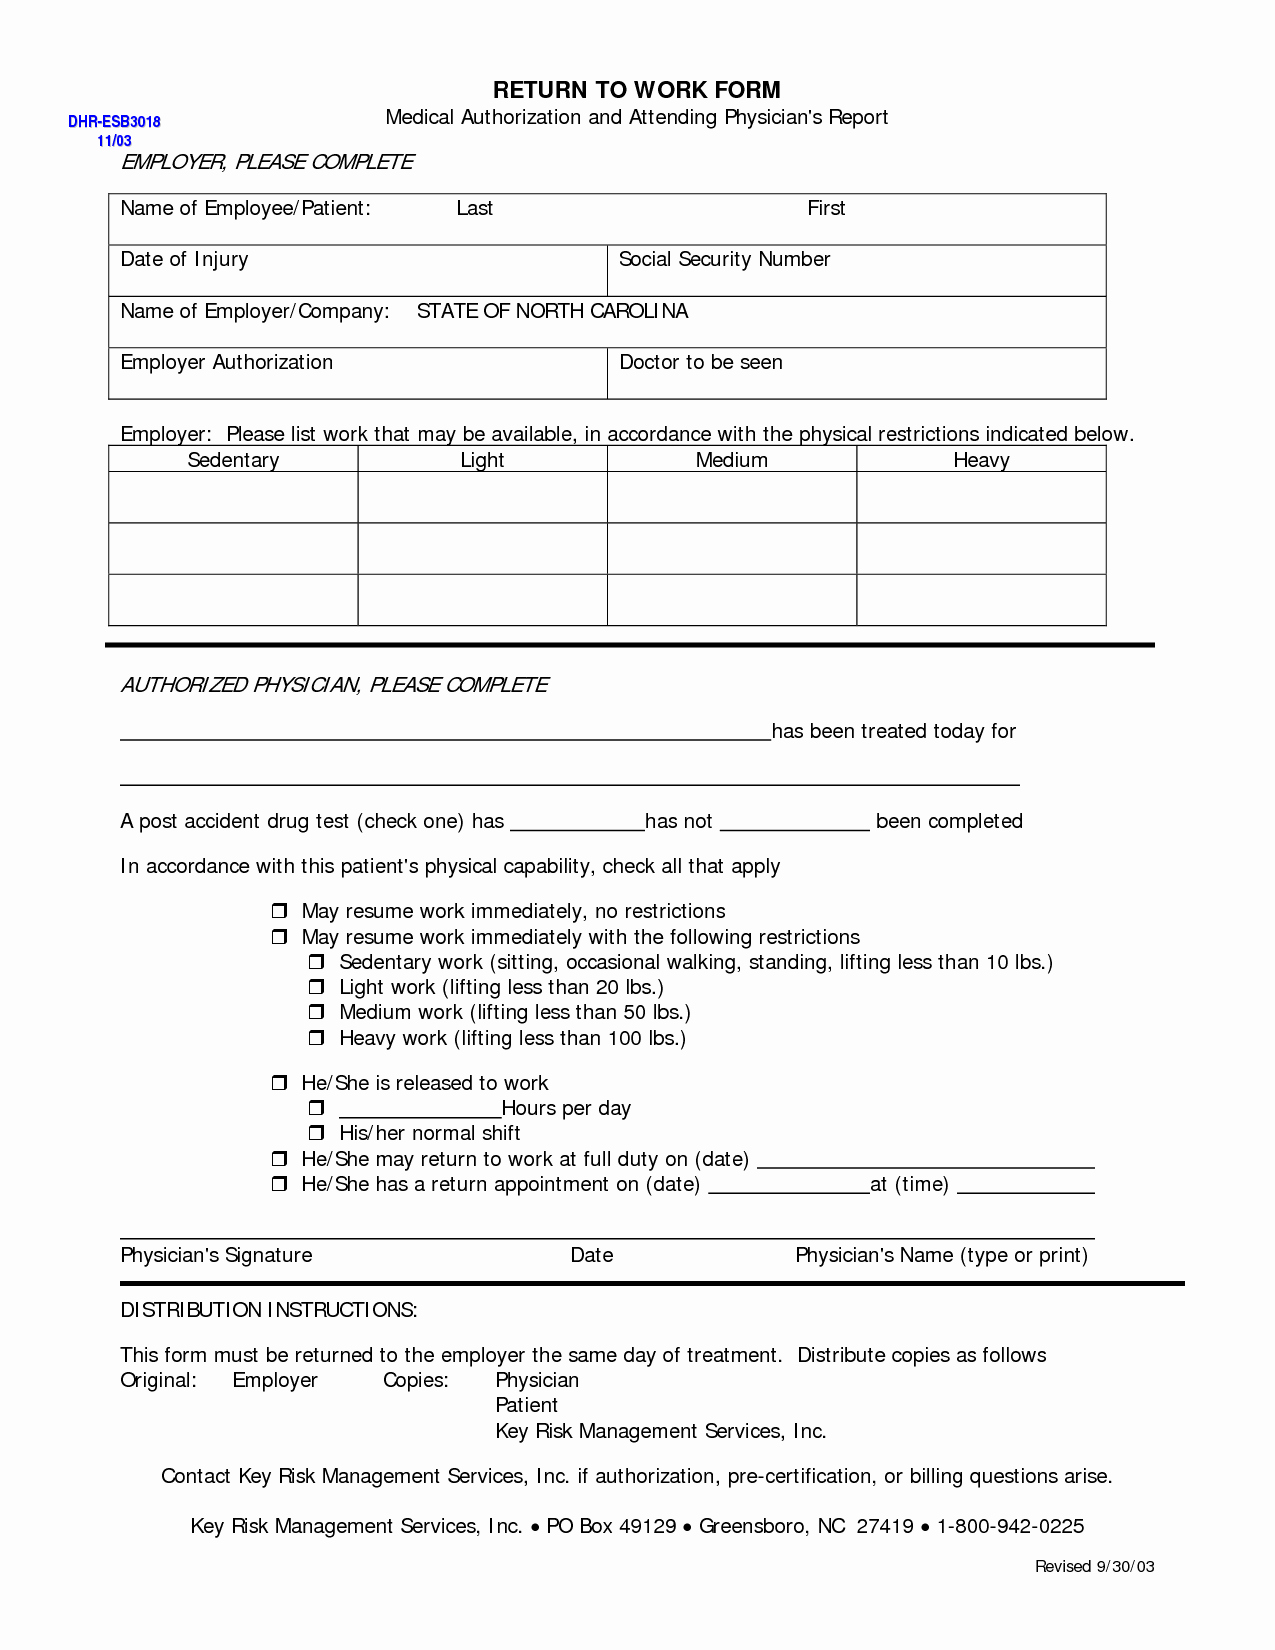 Work Release form From Hospital Awesome Best S Of Return to Work Doctor Template Return to